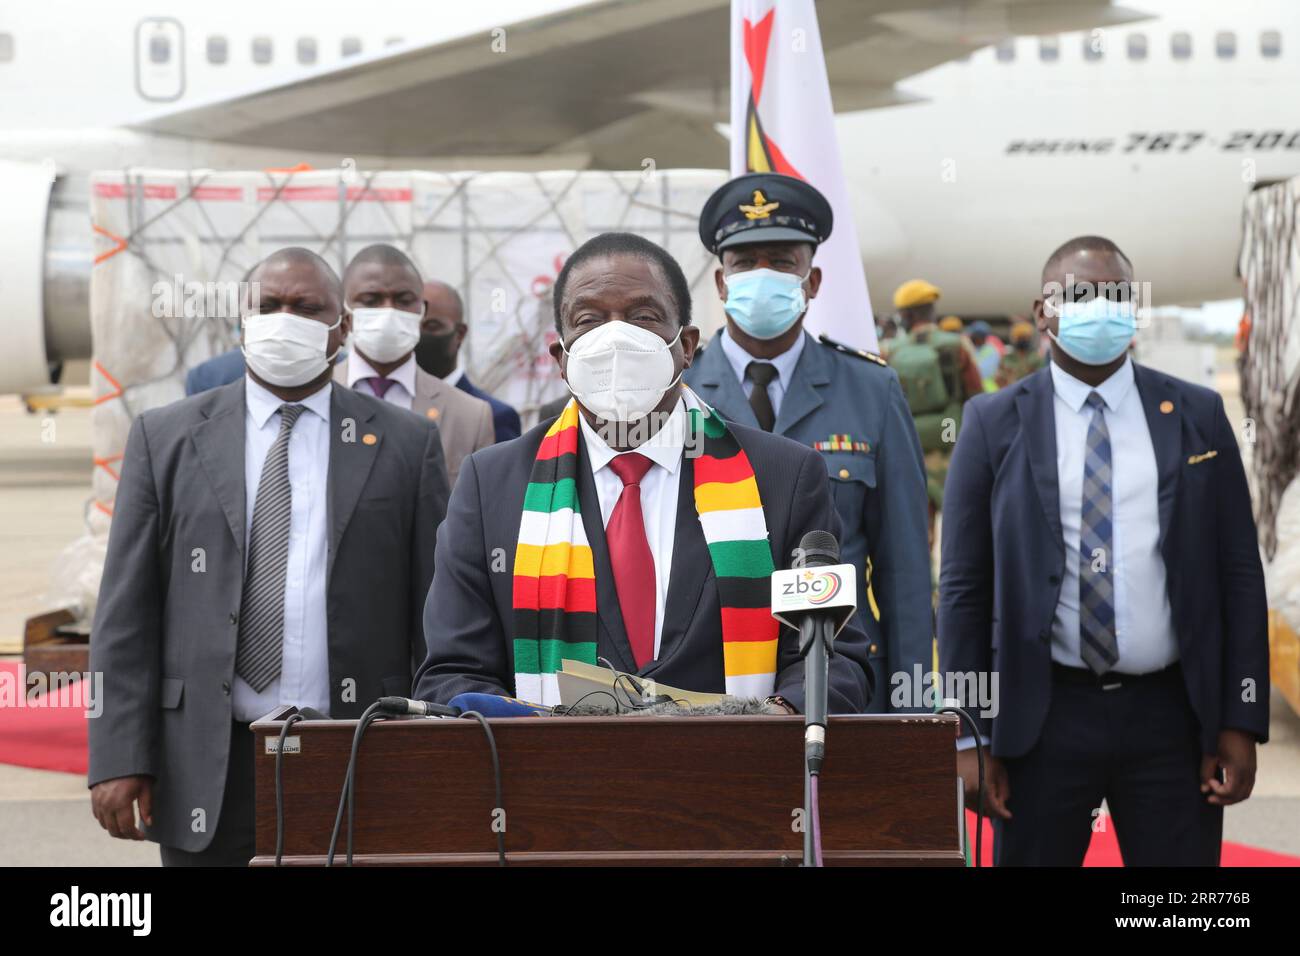 210316 -- HARARE, March 16, 2021 -- Zimbabwean President Emmerson Mnangagwa delivers a speech as a batch of COVID-19 vaccines arrive at Robert Gabriel Mugabe International Airport in Harare, Zimbabwe, March 16, 2021. Zimbabwe on Tuesday received a second batch of Sinopharm doses donated by China plus an additional Sinovac doses commercially procured by the government.  ZIMBABWE-HARARE-CHINA-COVID-19 VACCINE-ARRIVAL ZhangxYuliang PUBLICATIONxNOTxINxCHN Stock Photo